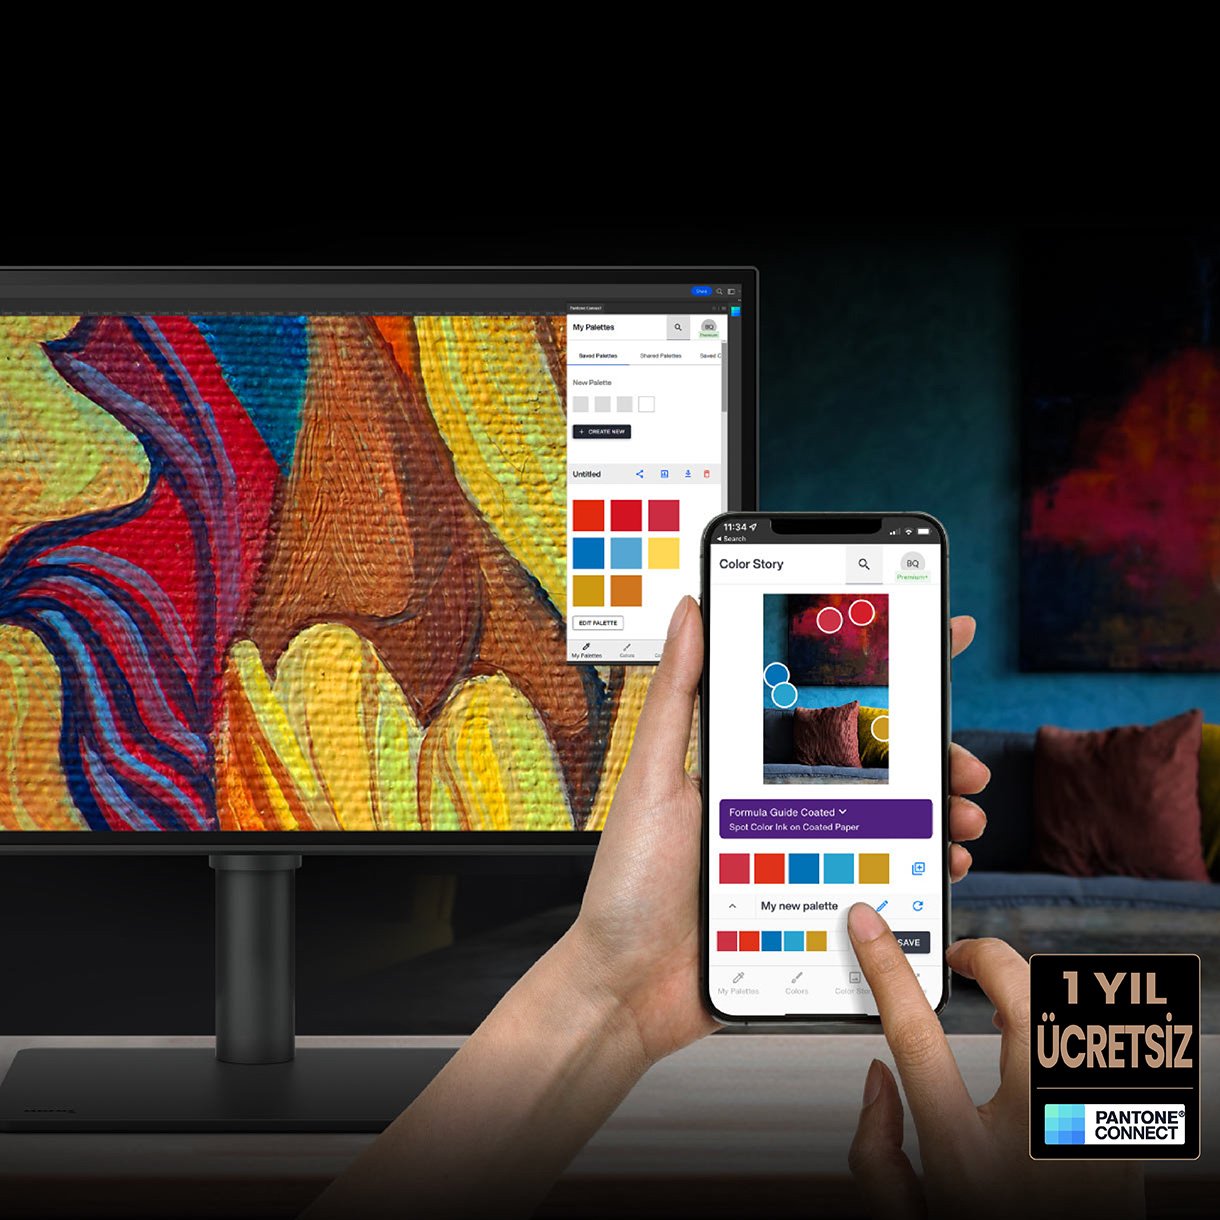 Go digital with BenQ, the first brand to work with Pantone on a mobile app. As an existing owner or a new purchaser of BenQ professional monitors, you get one year of free Pantone Connect Premium for digitally mobile color consistency and accuracy.